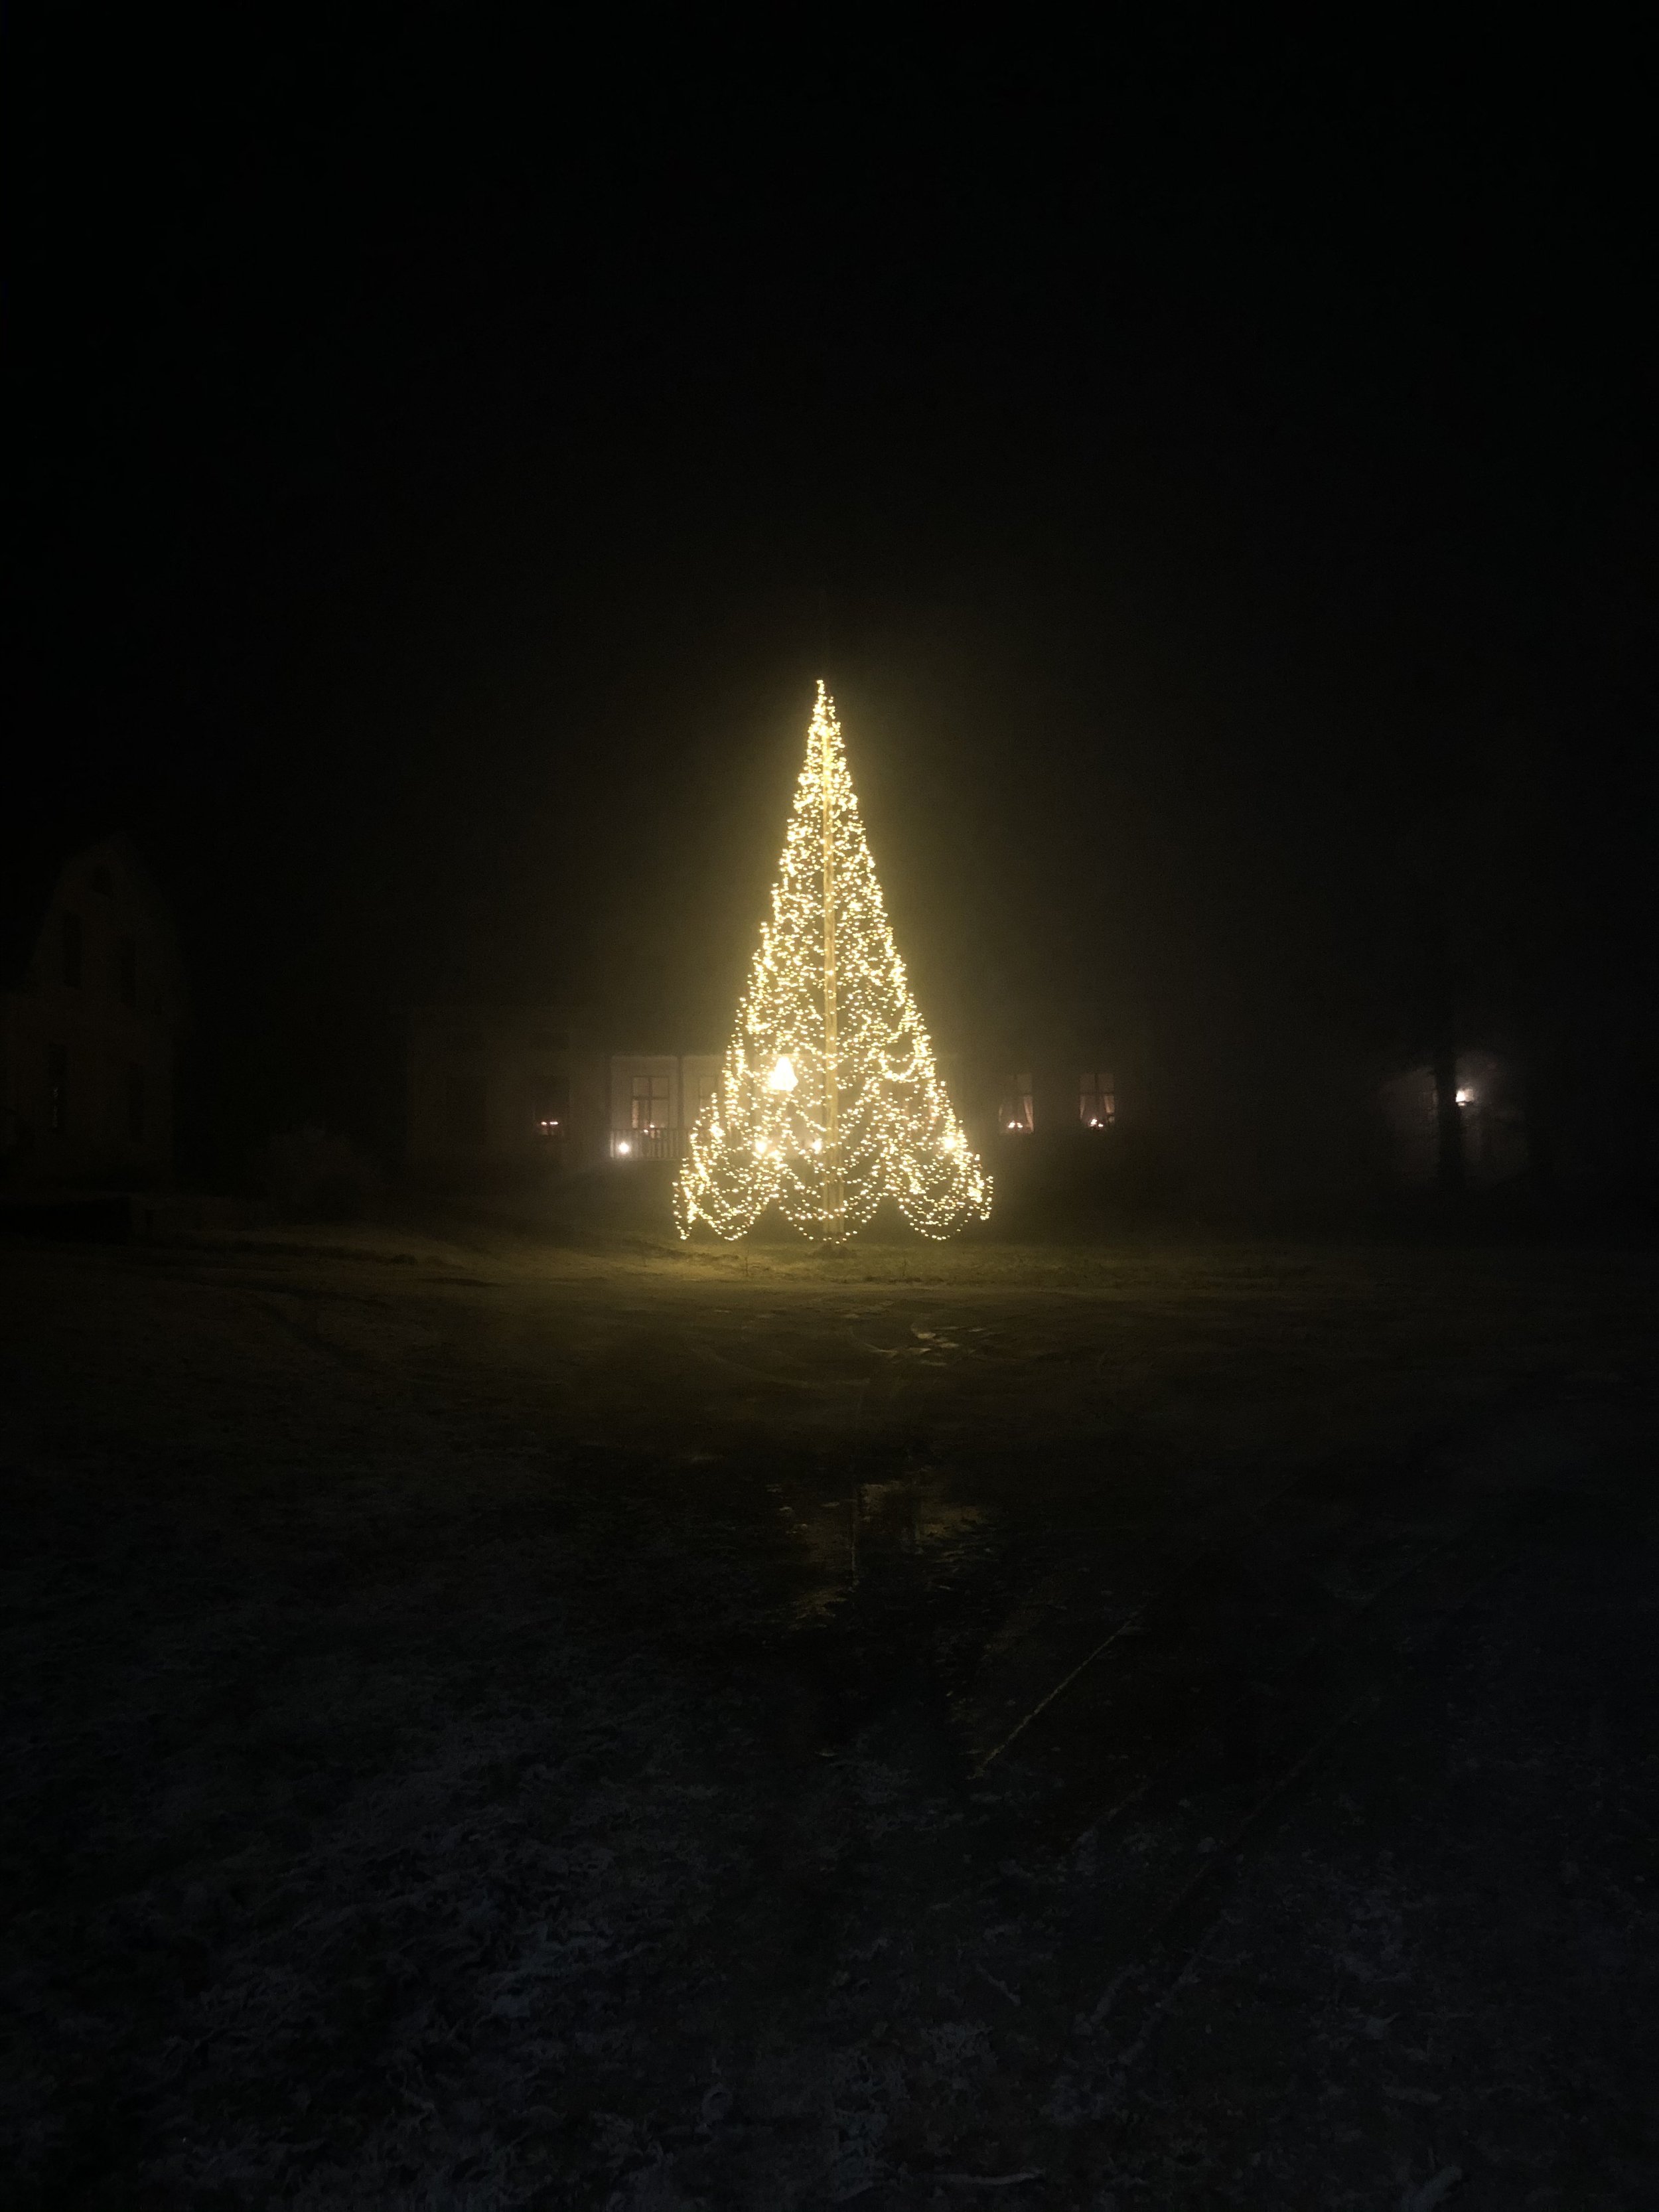 An outdoor Christmas tree near Nadia's home in Sweden. Photo: Nadia Henderson